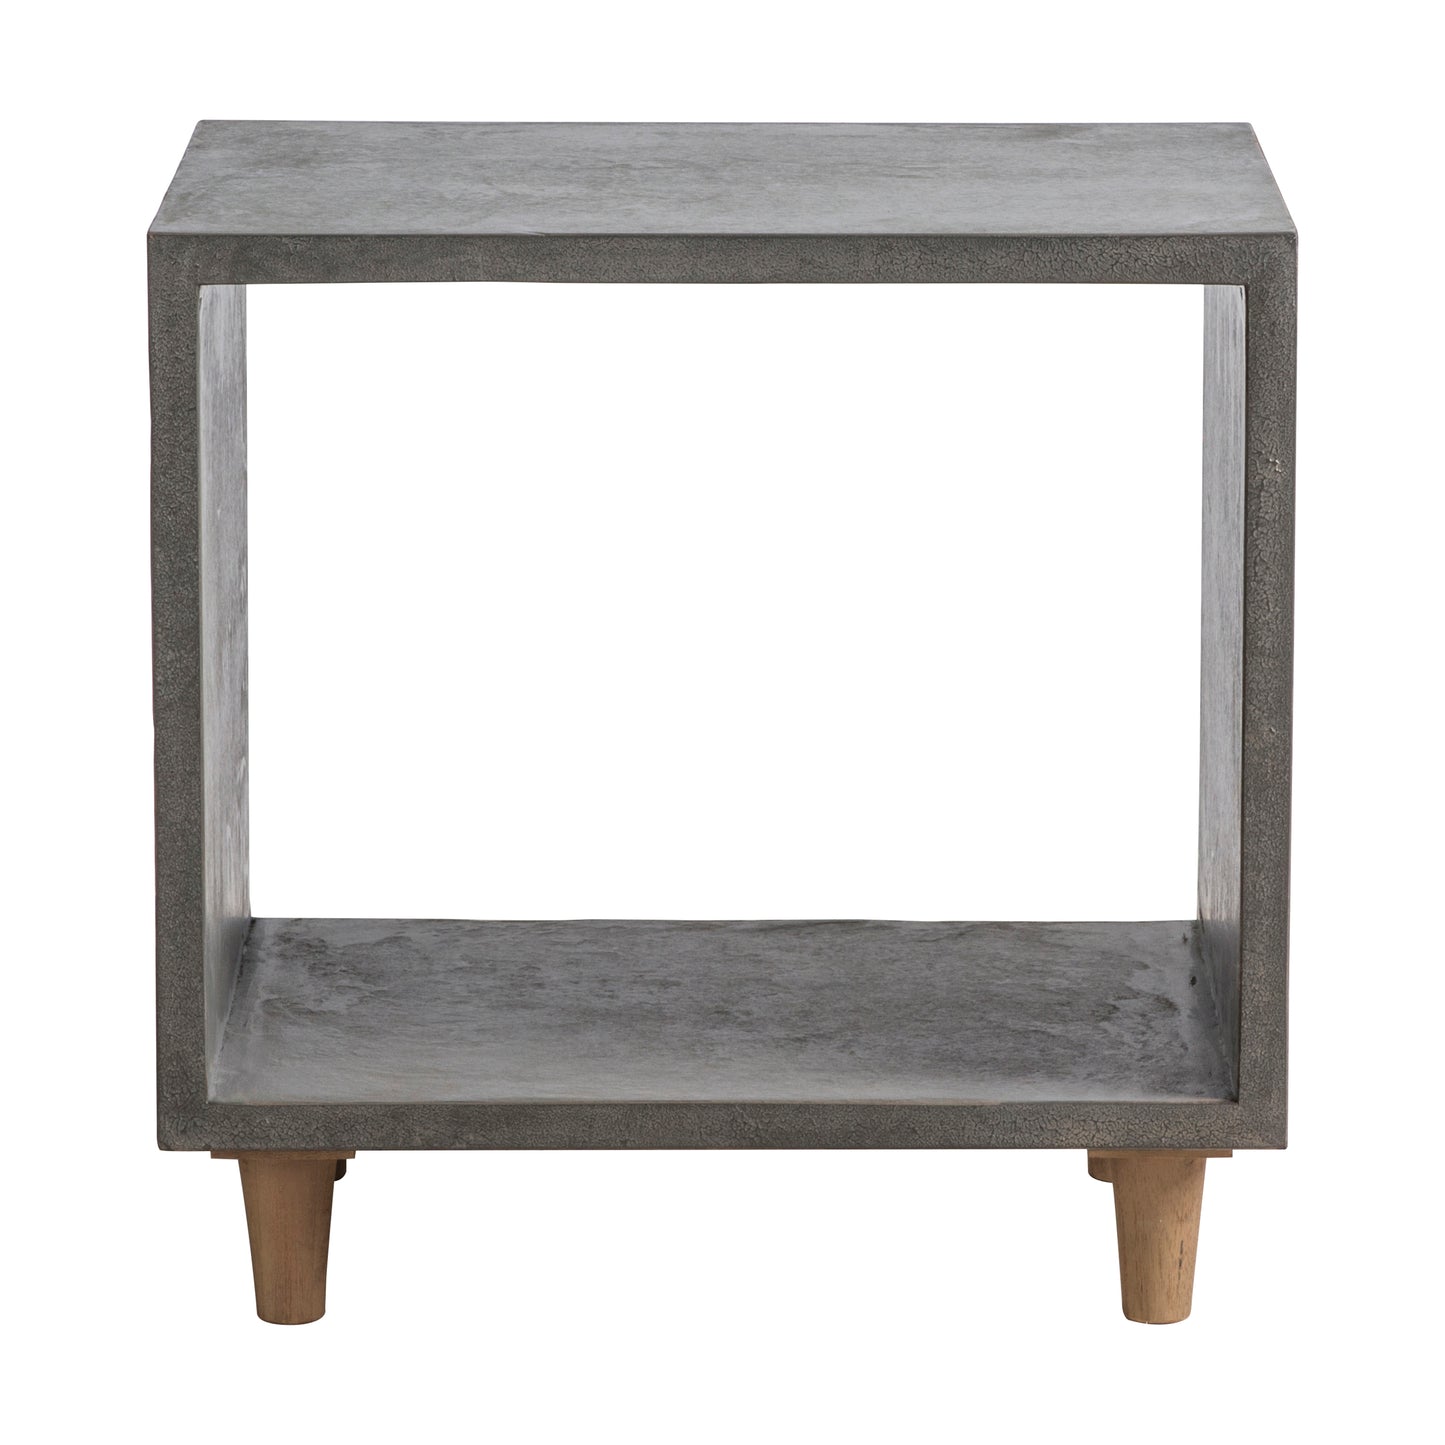 A Challaborough Cube Lamp Table 550x400x550mm with wooden legs perfect for home furniture and interior decor from Kikiathome.co.uk.